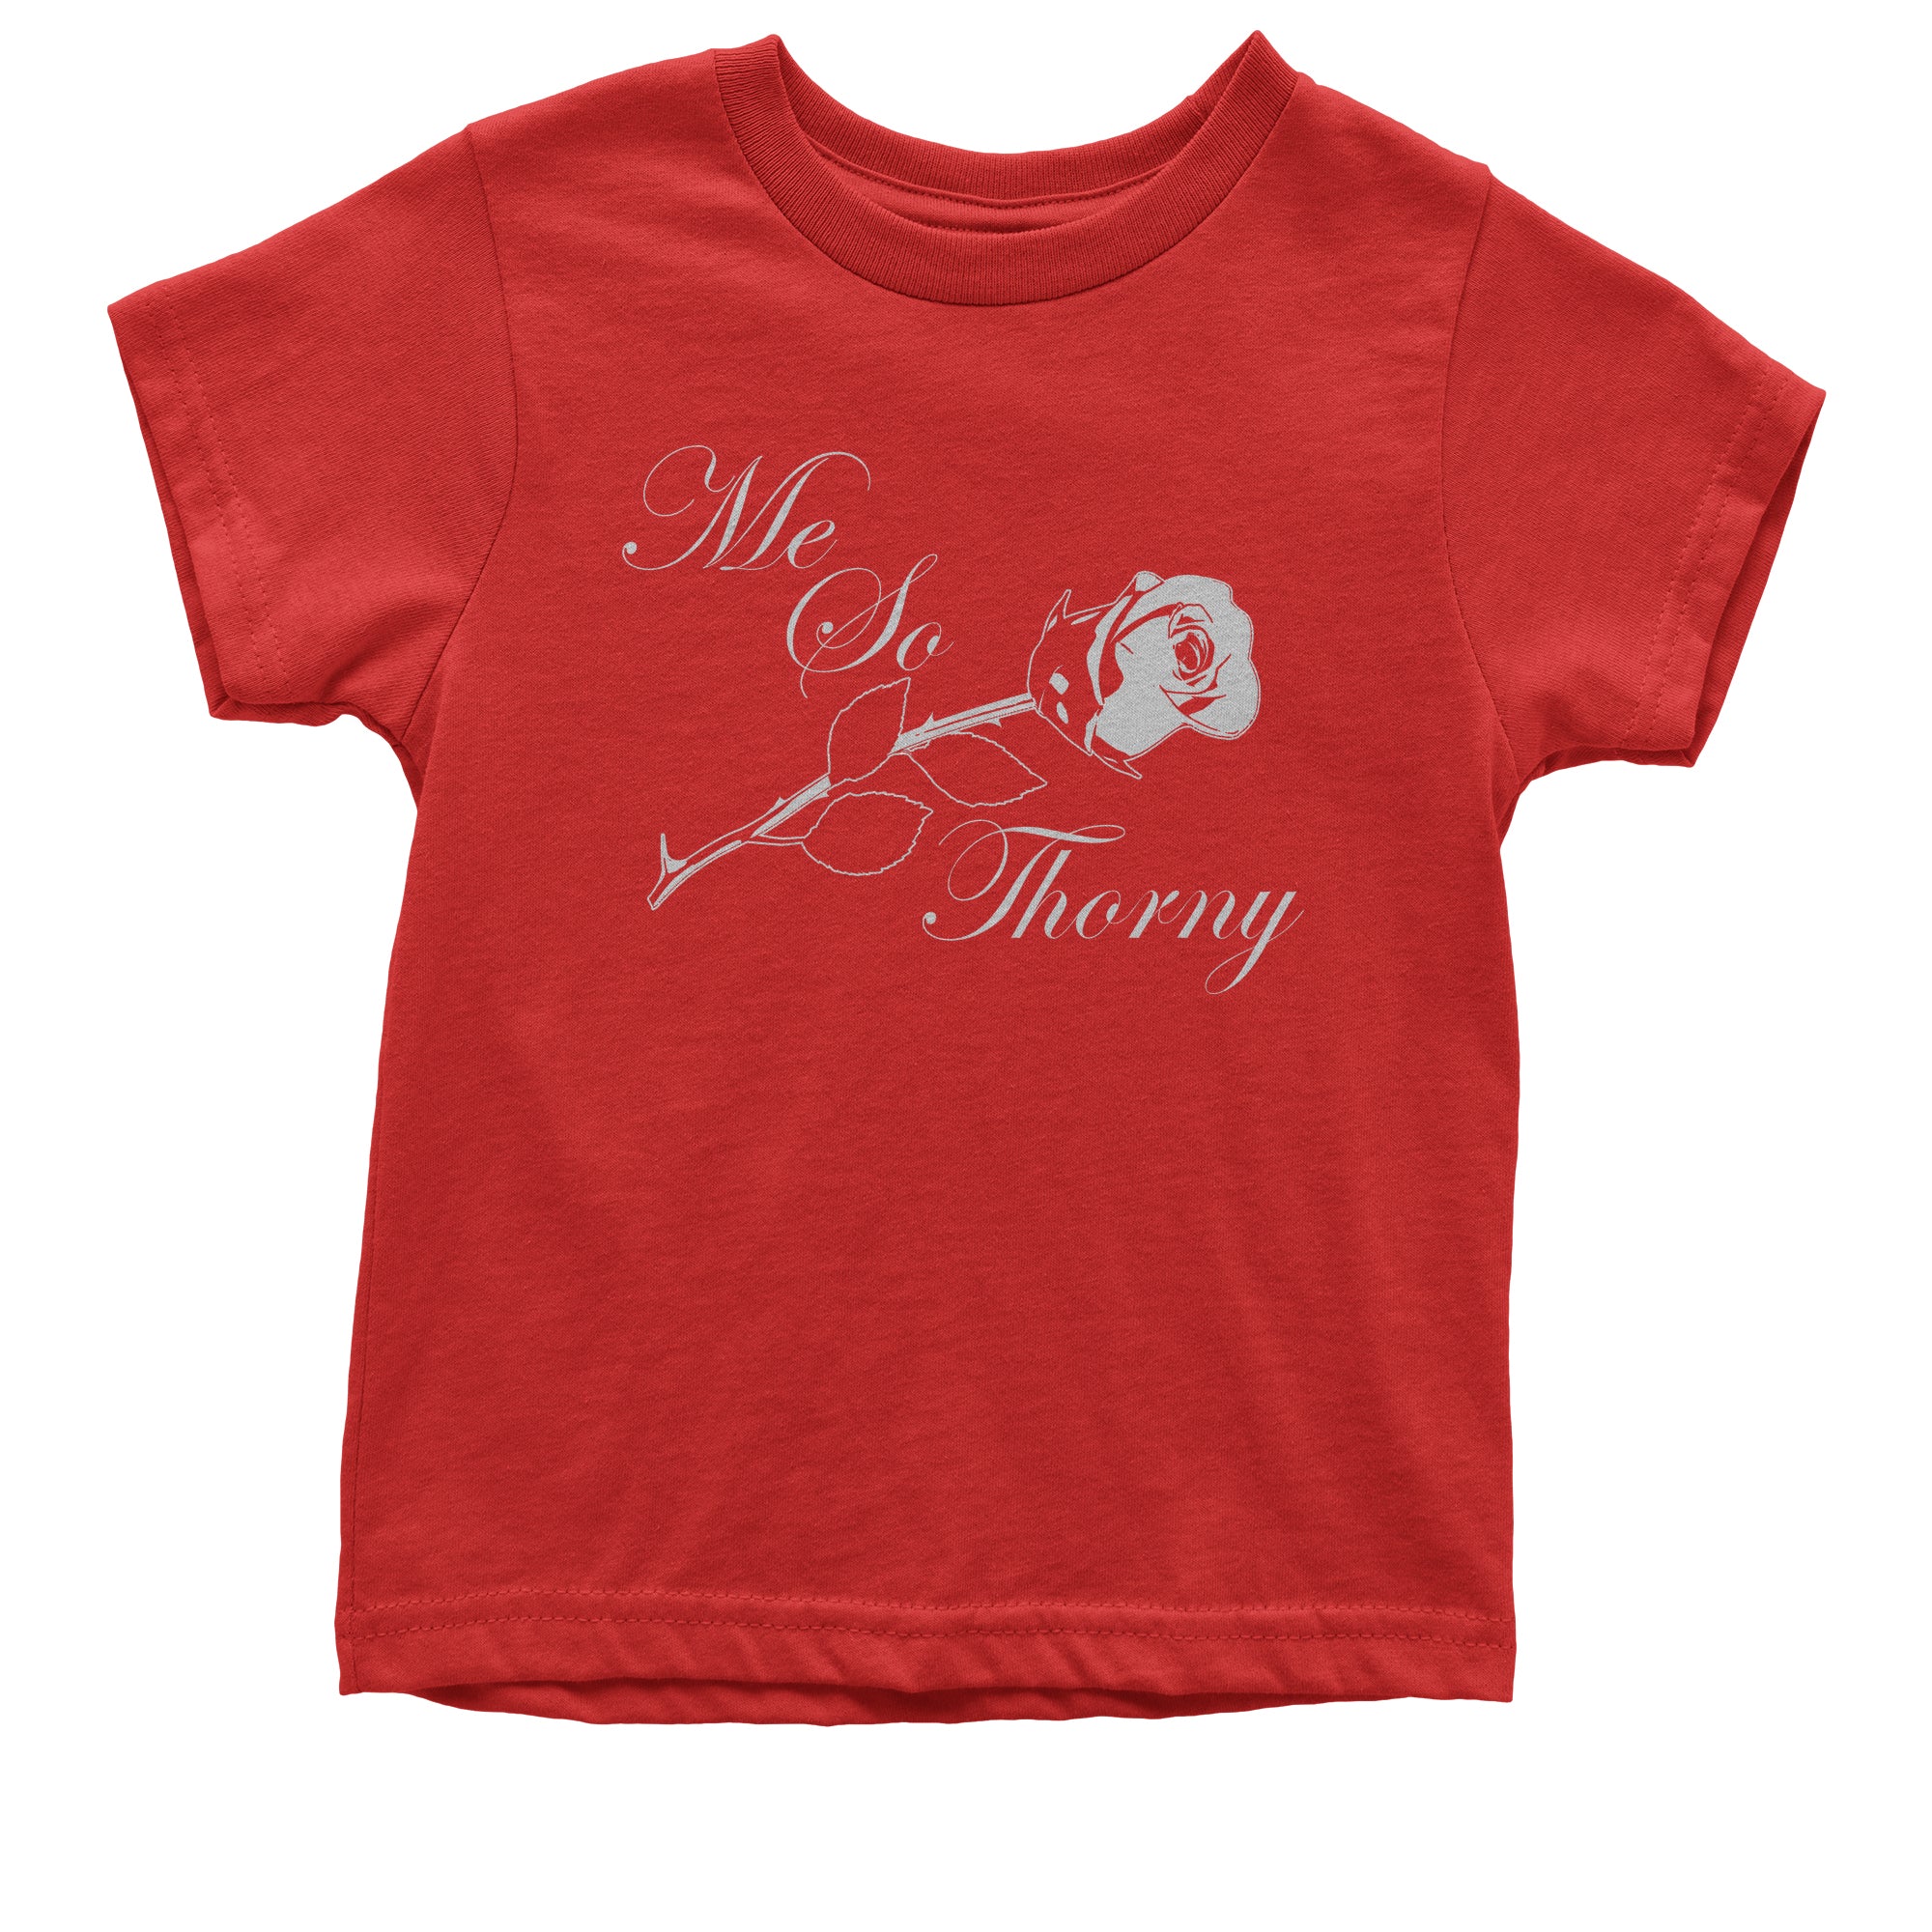 Me So Thorny Funny Romance and Valentine's Day Kid's T-Shirt